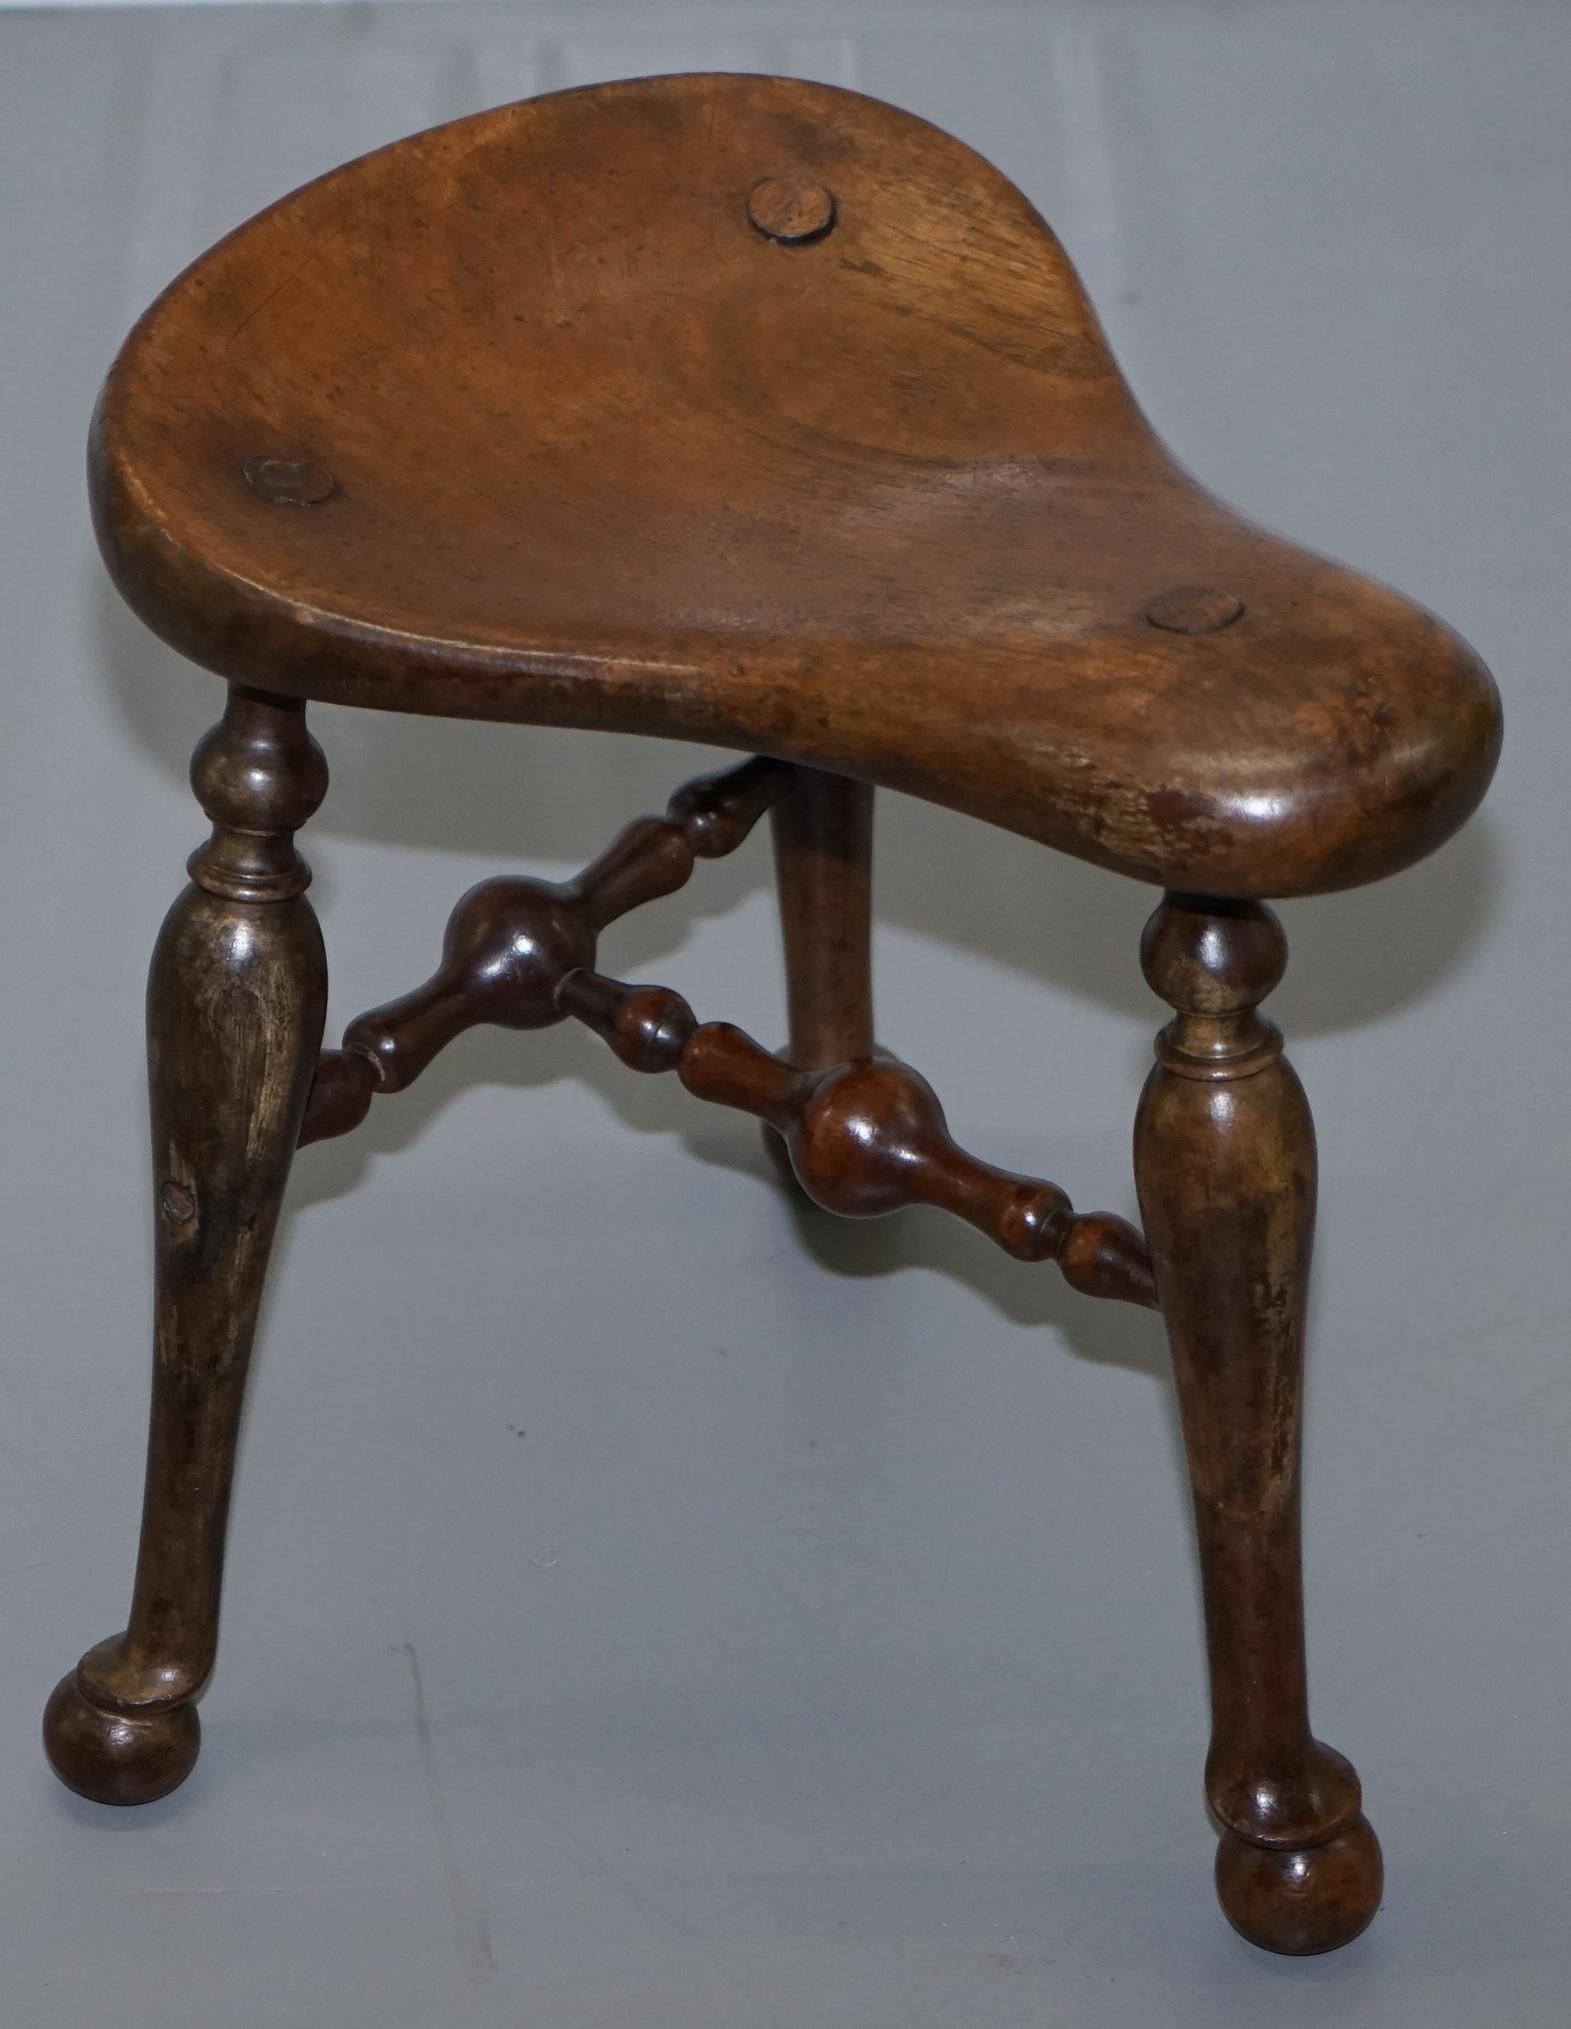 We are delighted to this stunning original Victorian Walnut three legged Saddle stool by Jas Shoolbred

A truly glorious and artistic piece, made by the great Jas Shoolbred, it’s a three-legged stool and is known as a saddle or cock fighting